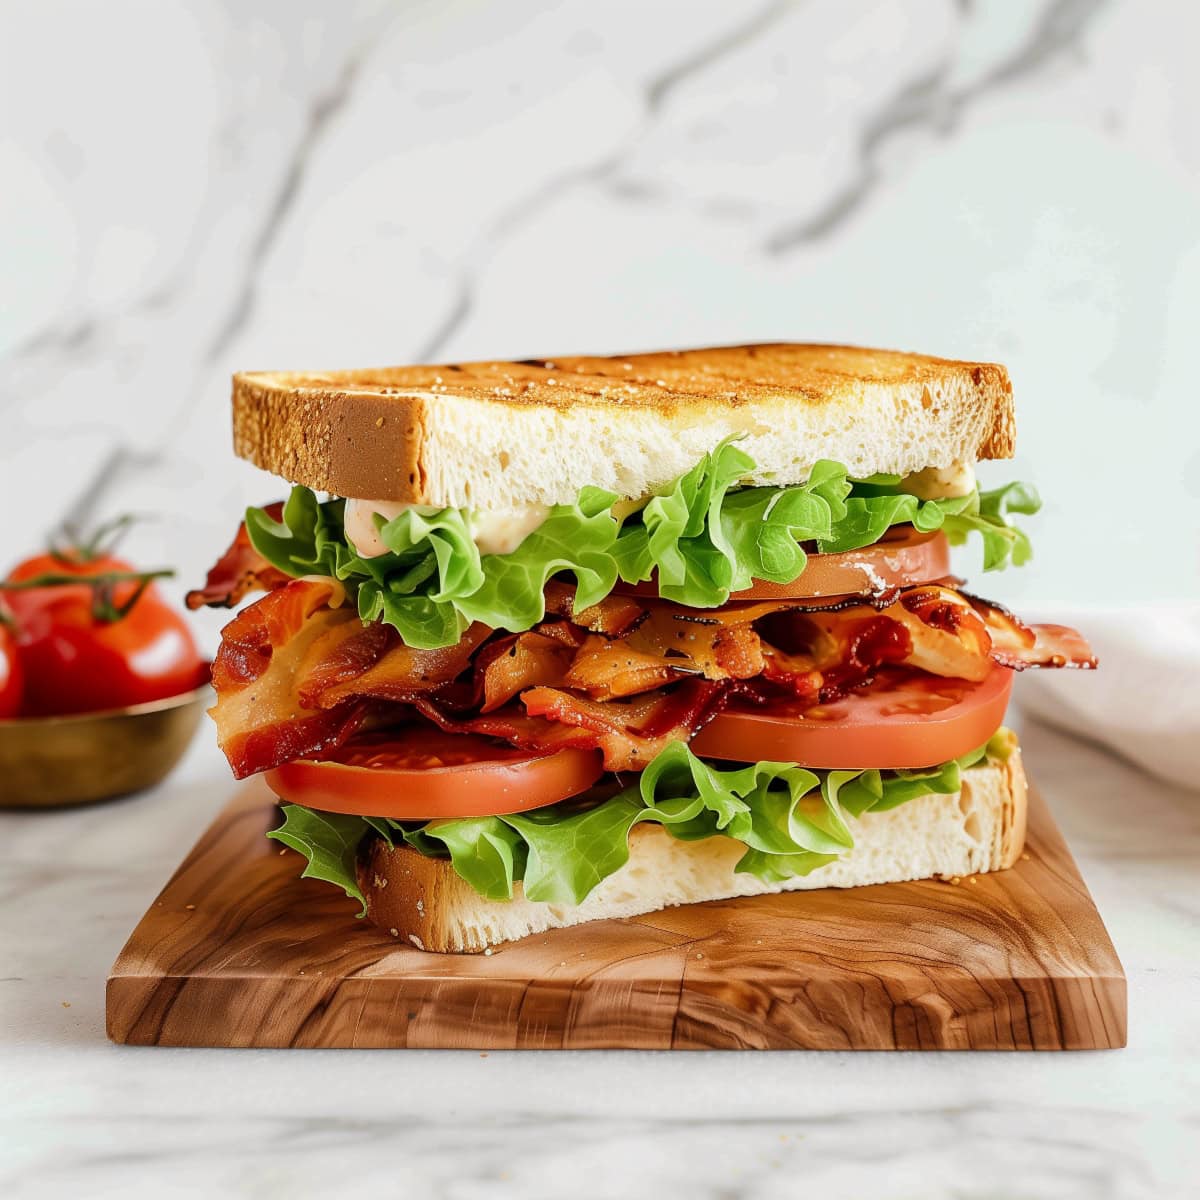 Fresh BLT sandwich, piled high with bacon, green leaf lettuce, and heirloom tomatoes on a wooden board.